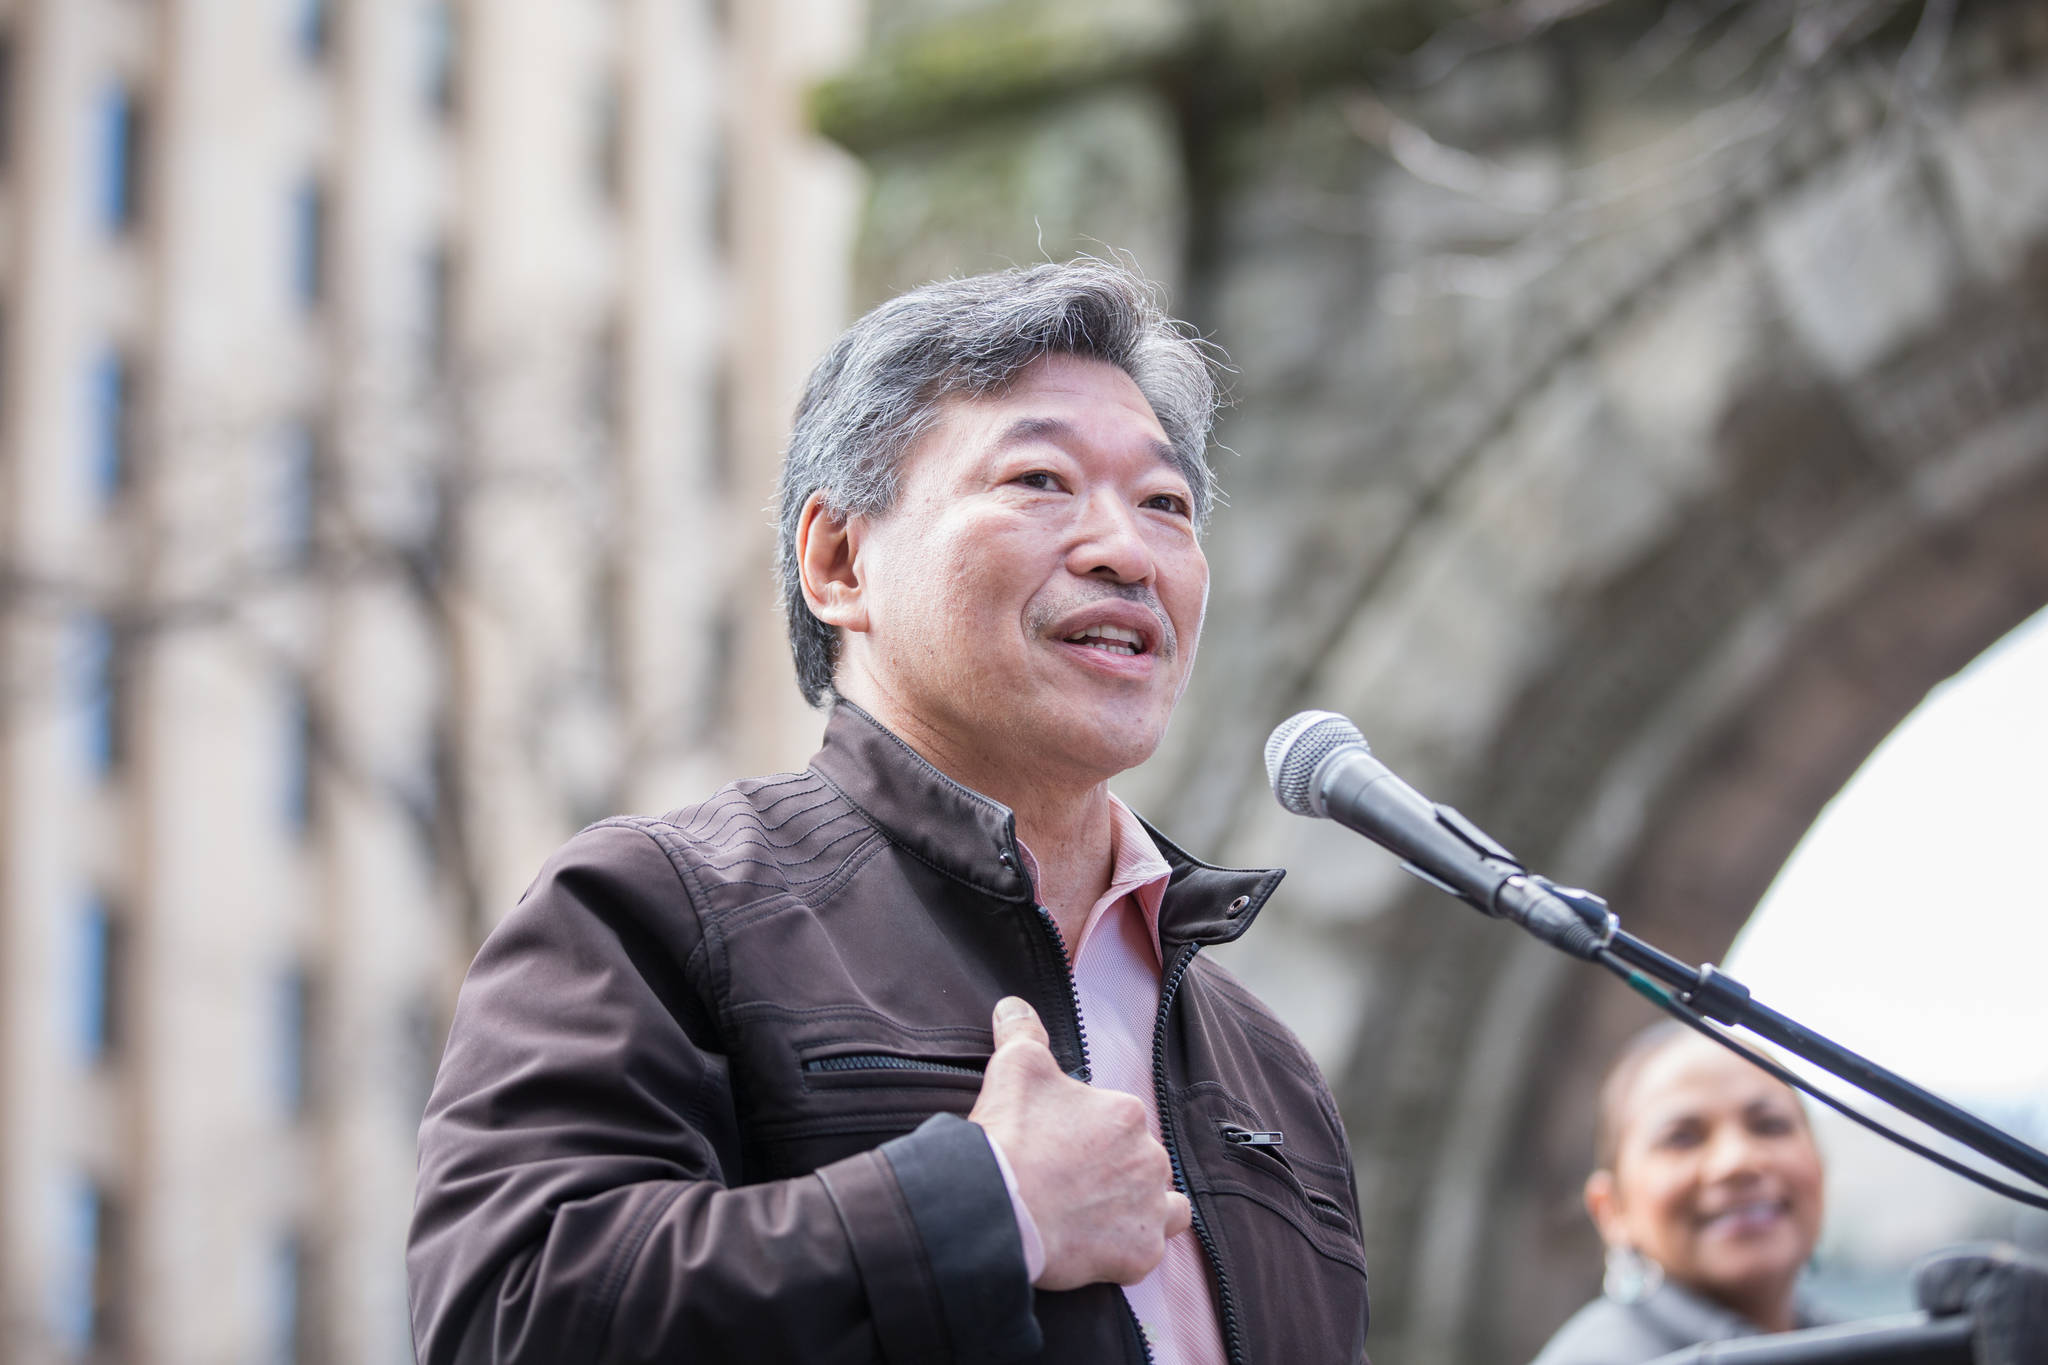 Bob Hasegawa speaking at the Tax Day rally in Seattle this year. He said: “We need to have a statewide conversation about comprehensive, progressive tax reform. It includes talking about a progressive income tax. Those who get the most out of society, are morally and socially obligated to put the most back into society so we can build a society that lifts all of us up, not just a few at the expense of the rest of us.” Photo by Alex Garland